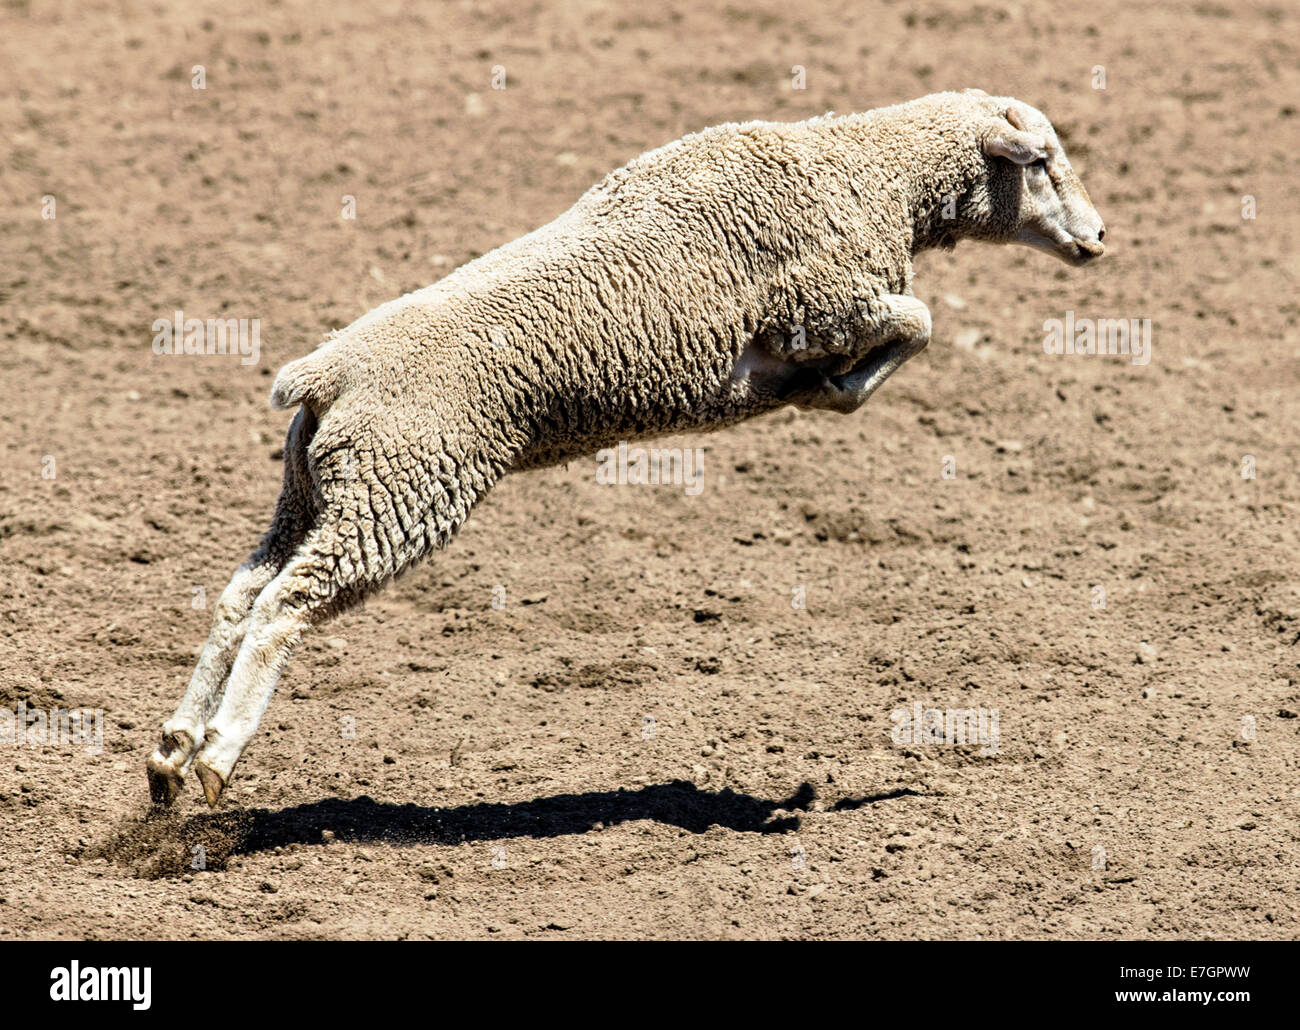 Sheep running & jumping in the mutton busting competition event, Chaffee County Fair & Rodeo Stock Photo